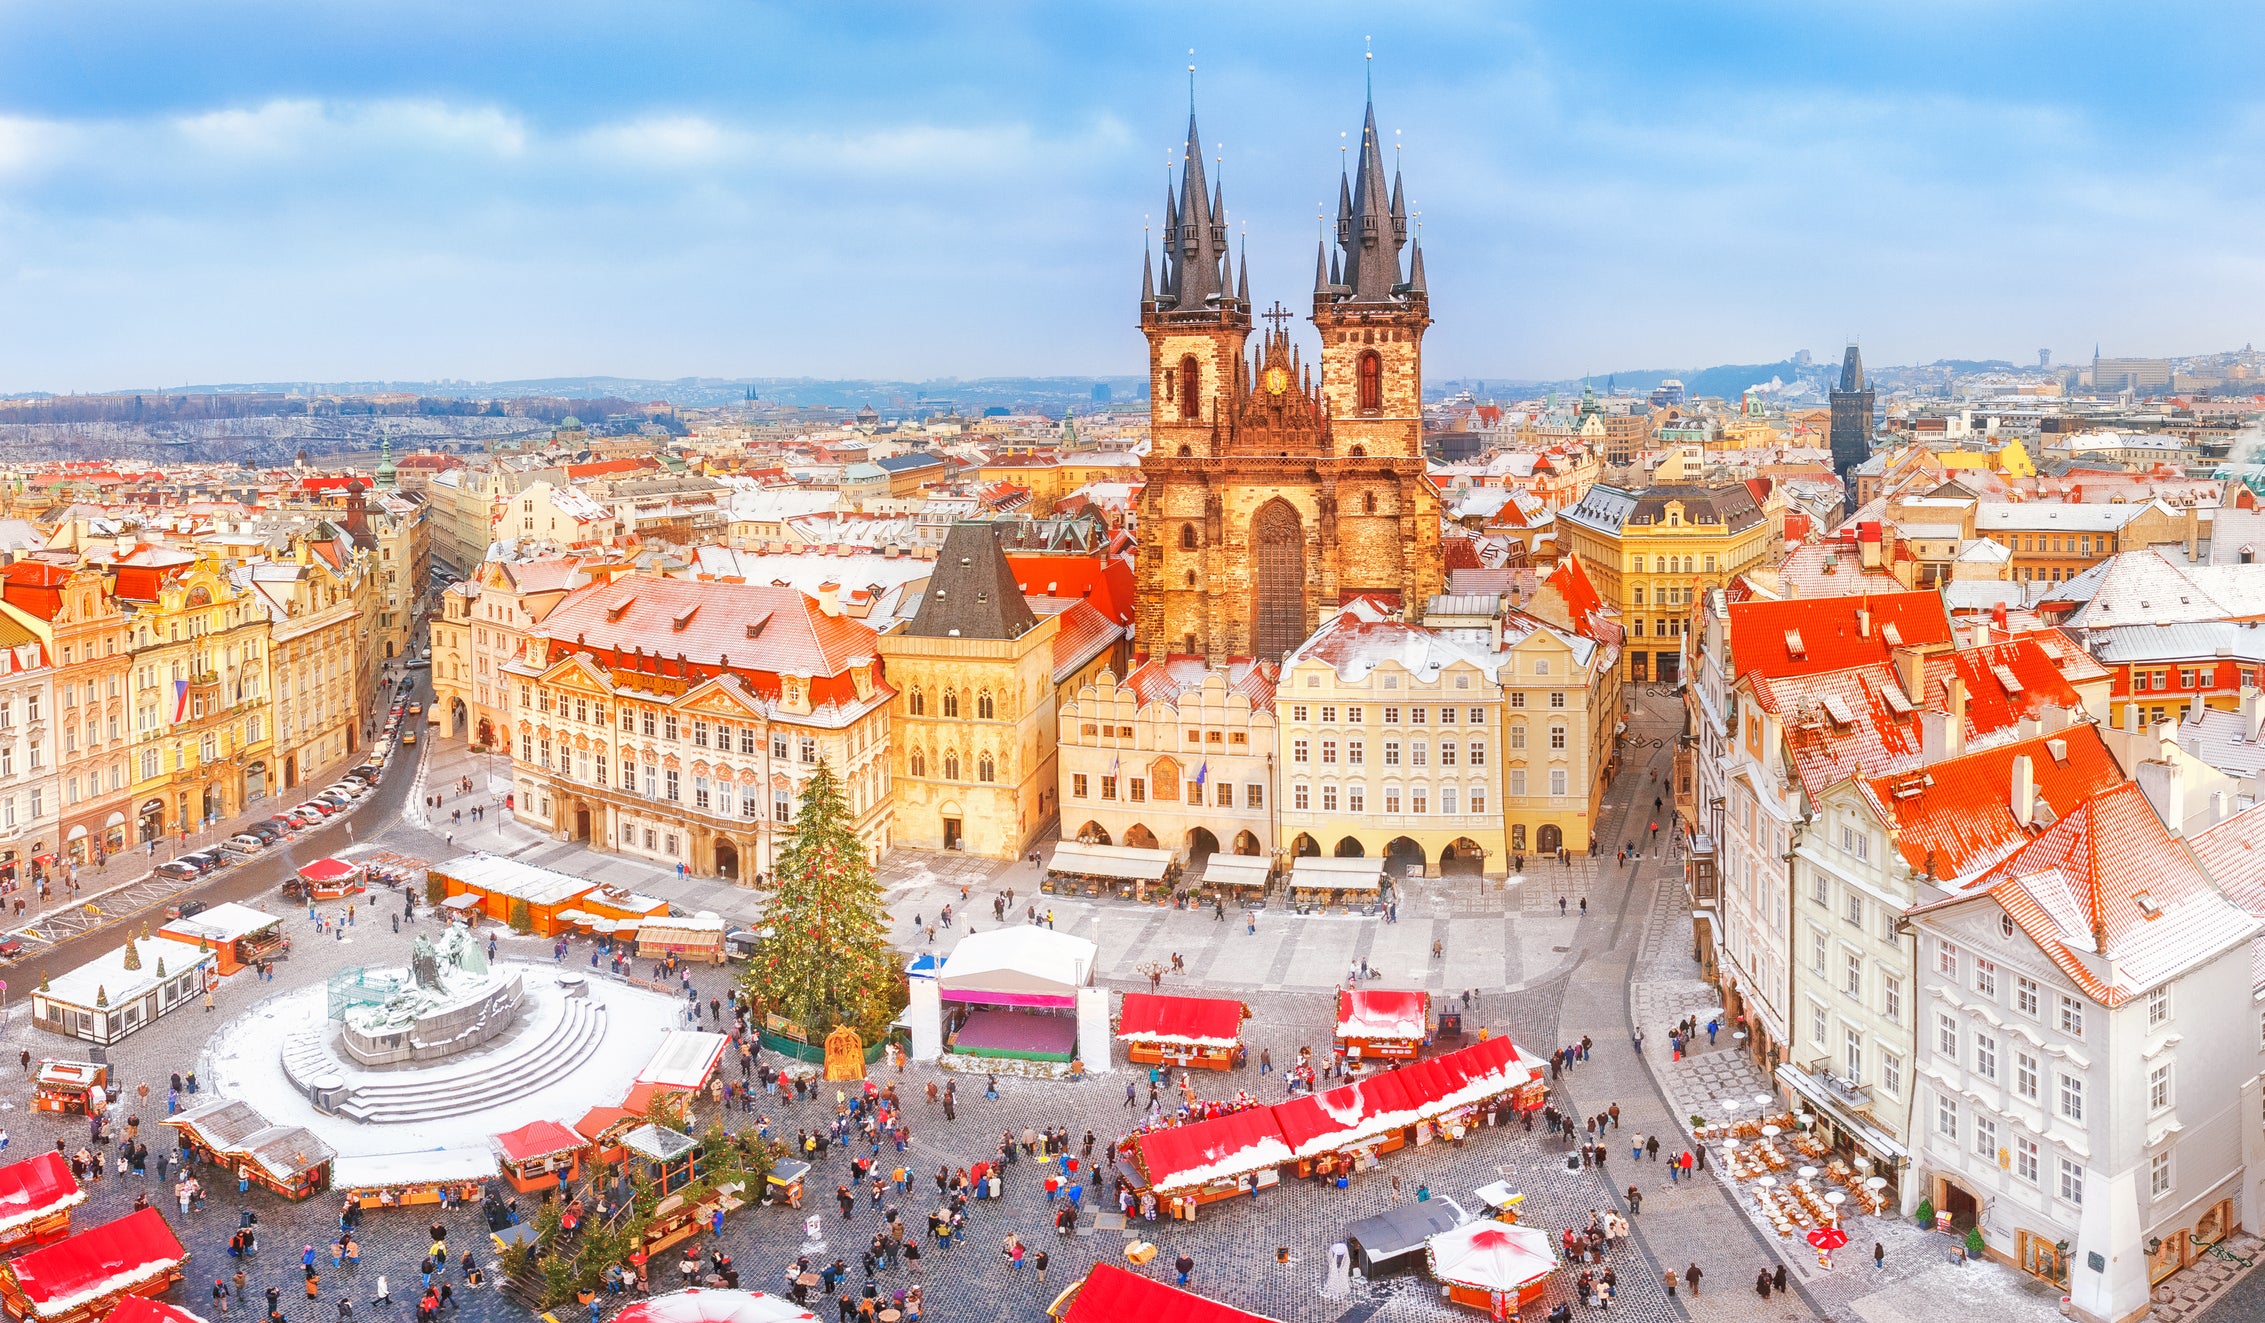 The chances of snow during your visit to Prague are fairly high